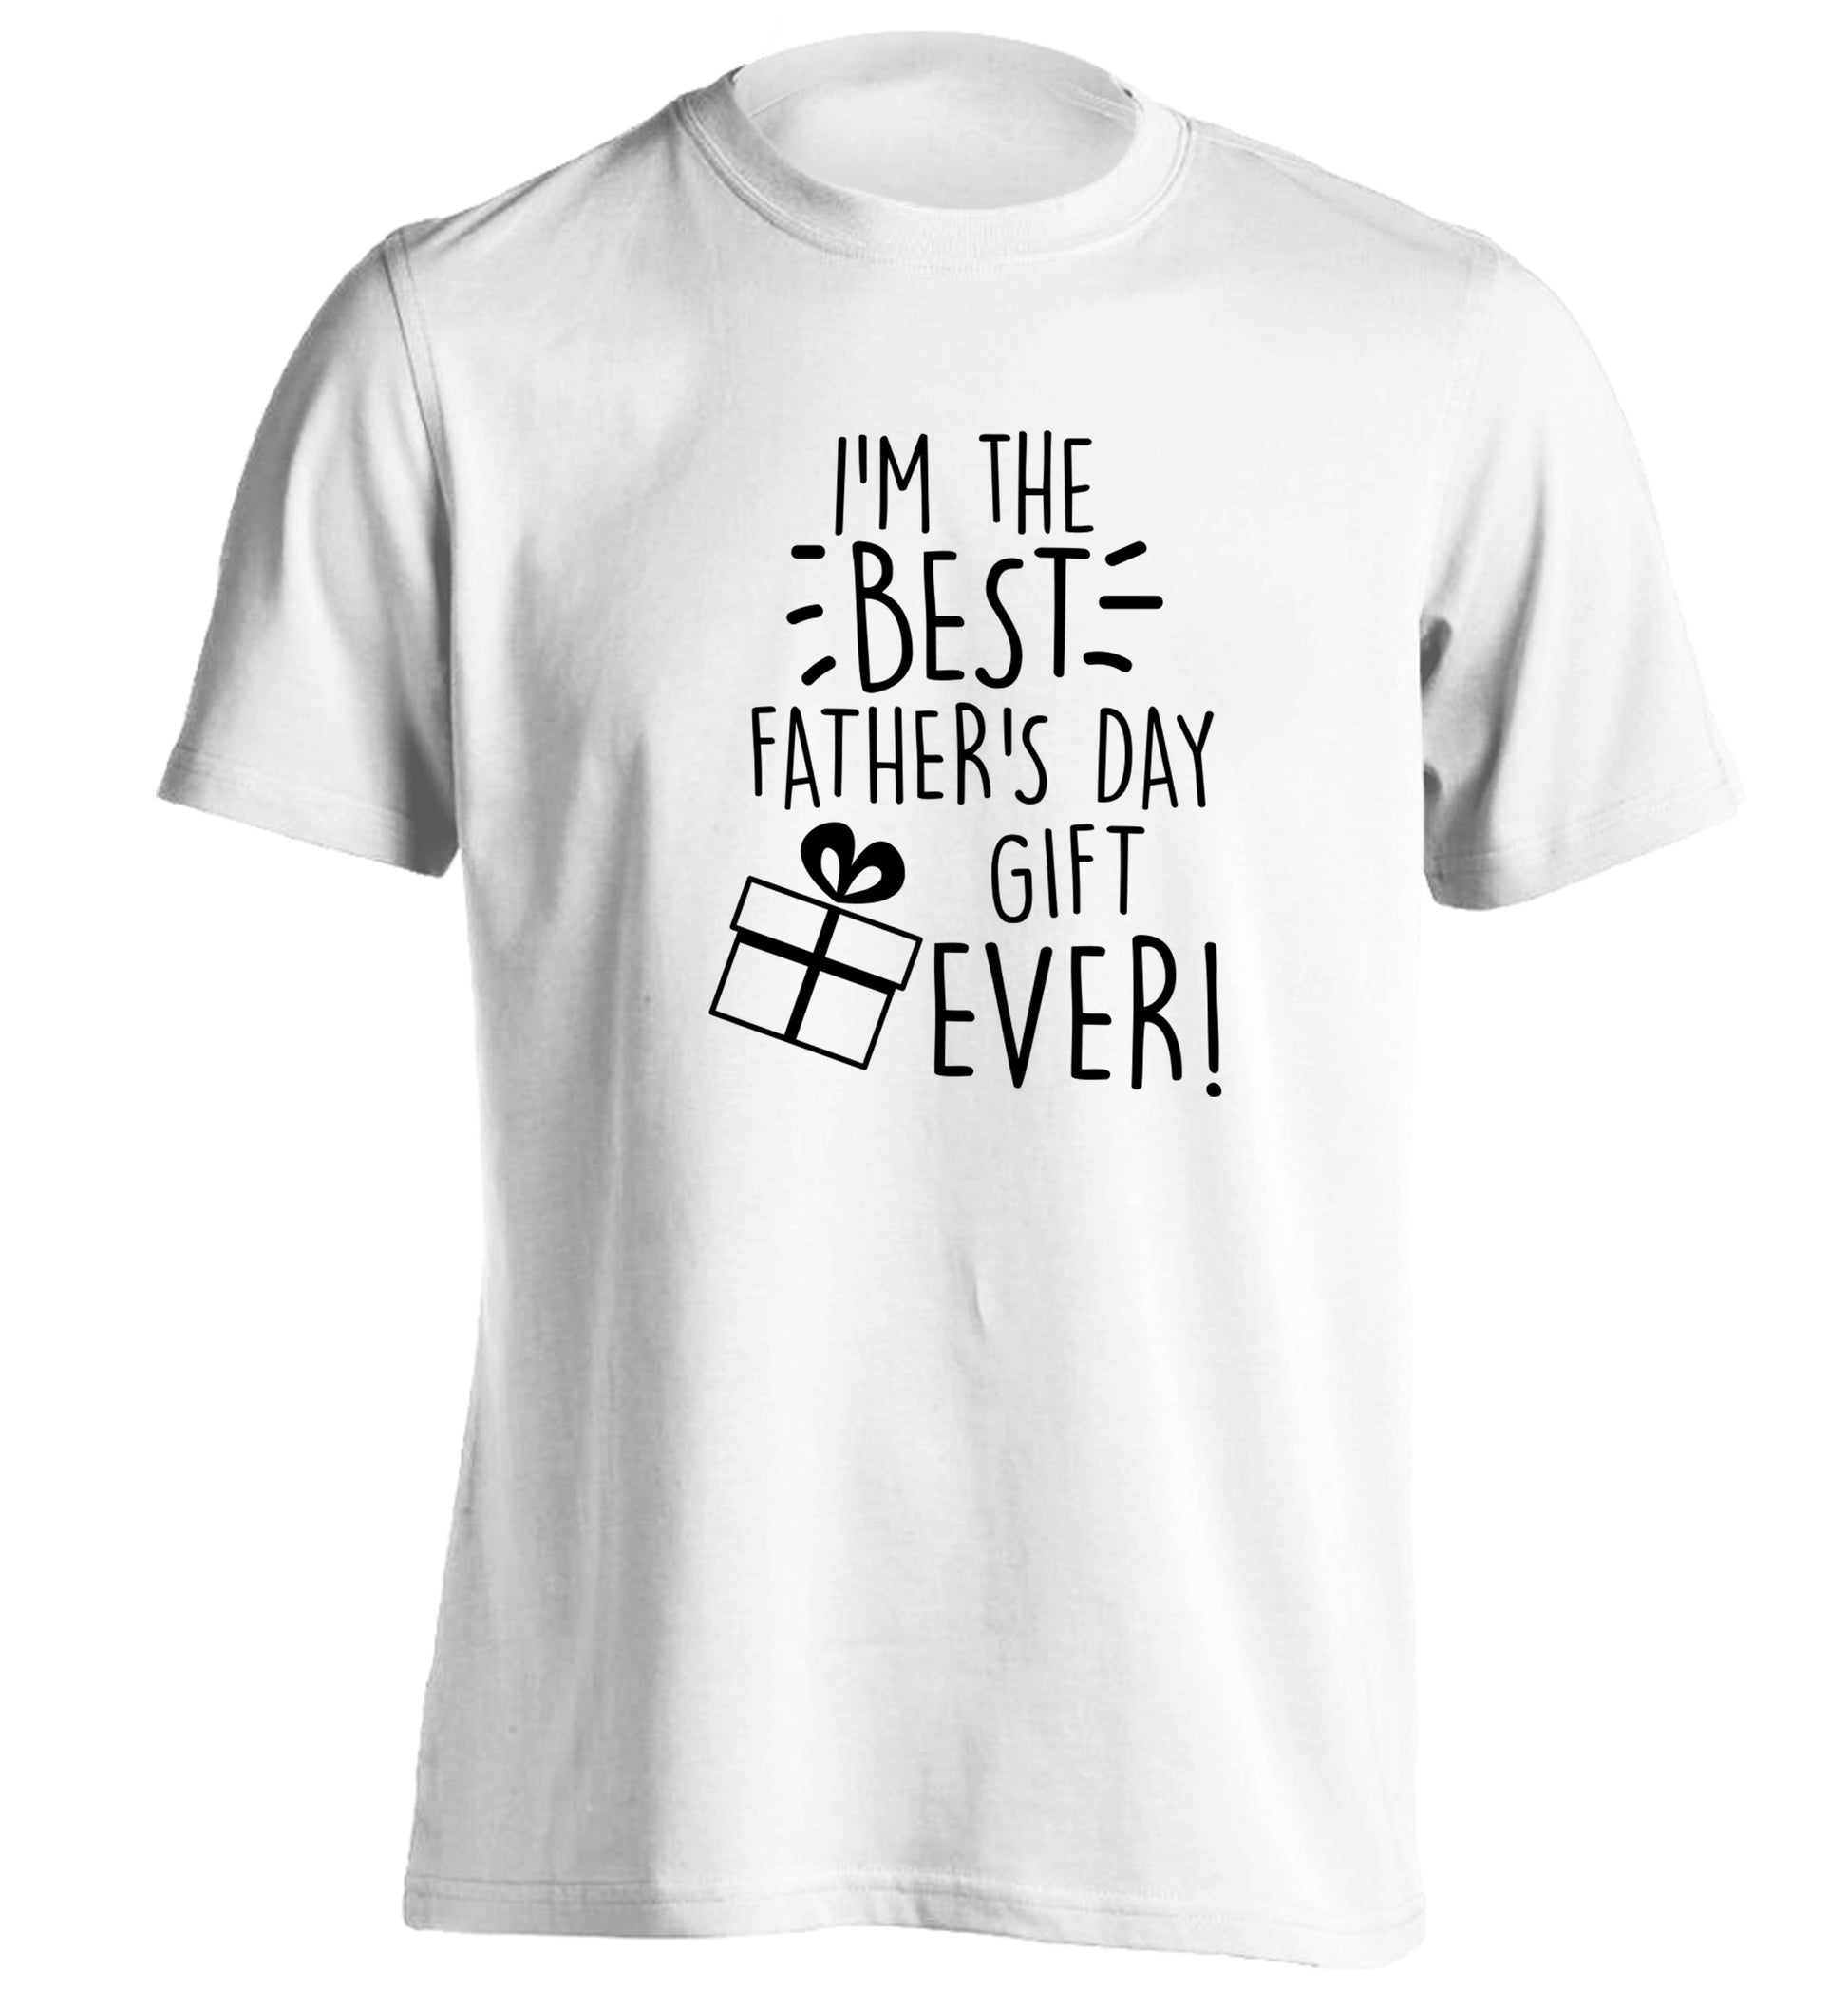 I'm the BEST father's day gift ever! adults unisex white Tshirt 2XL